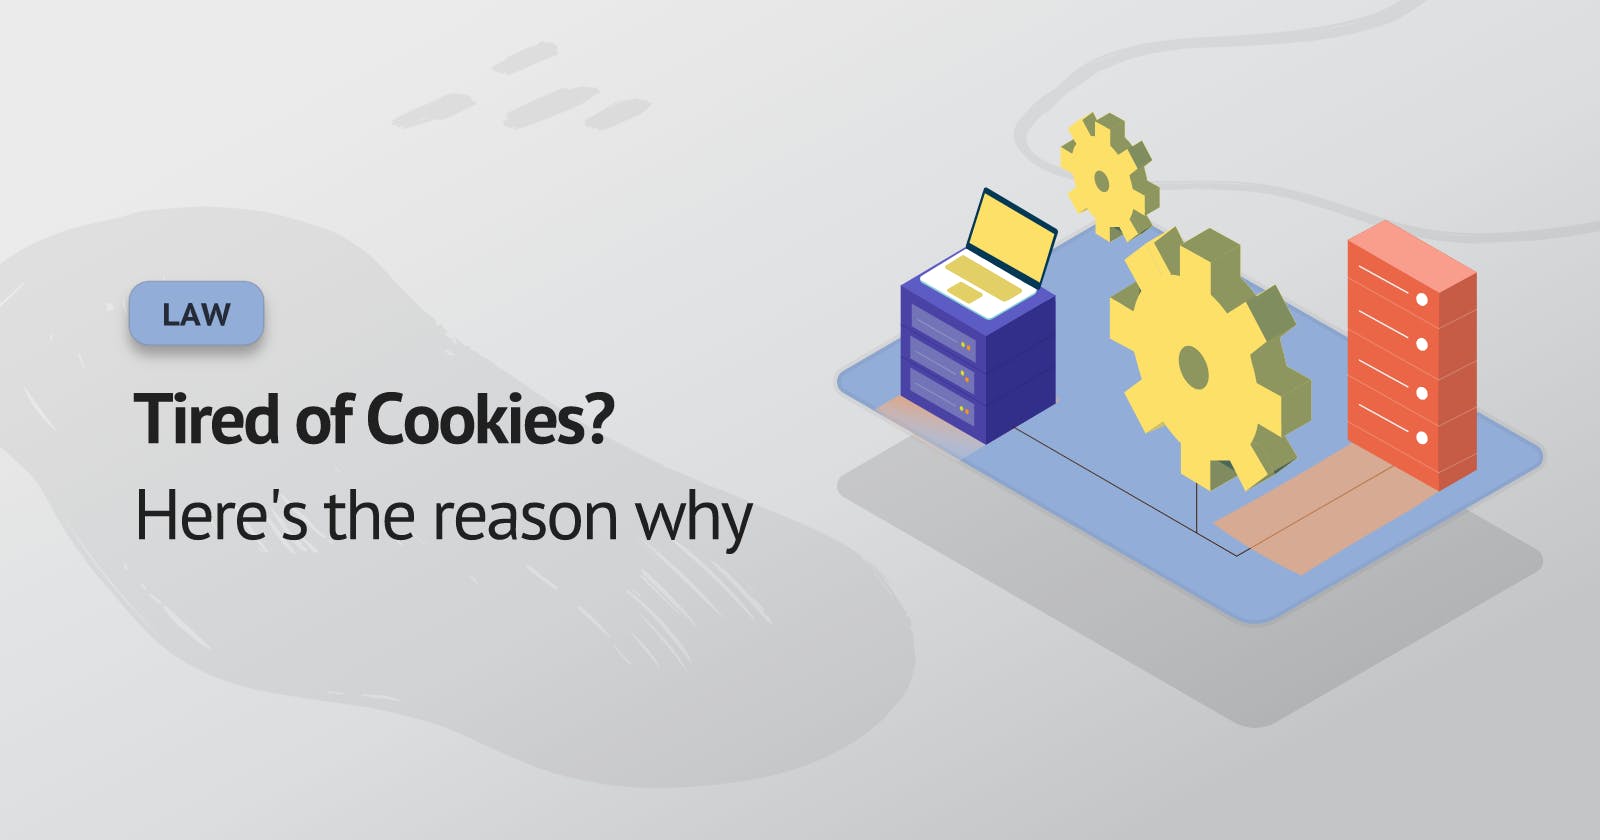 Tired of Cookies? Here's the reason why